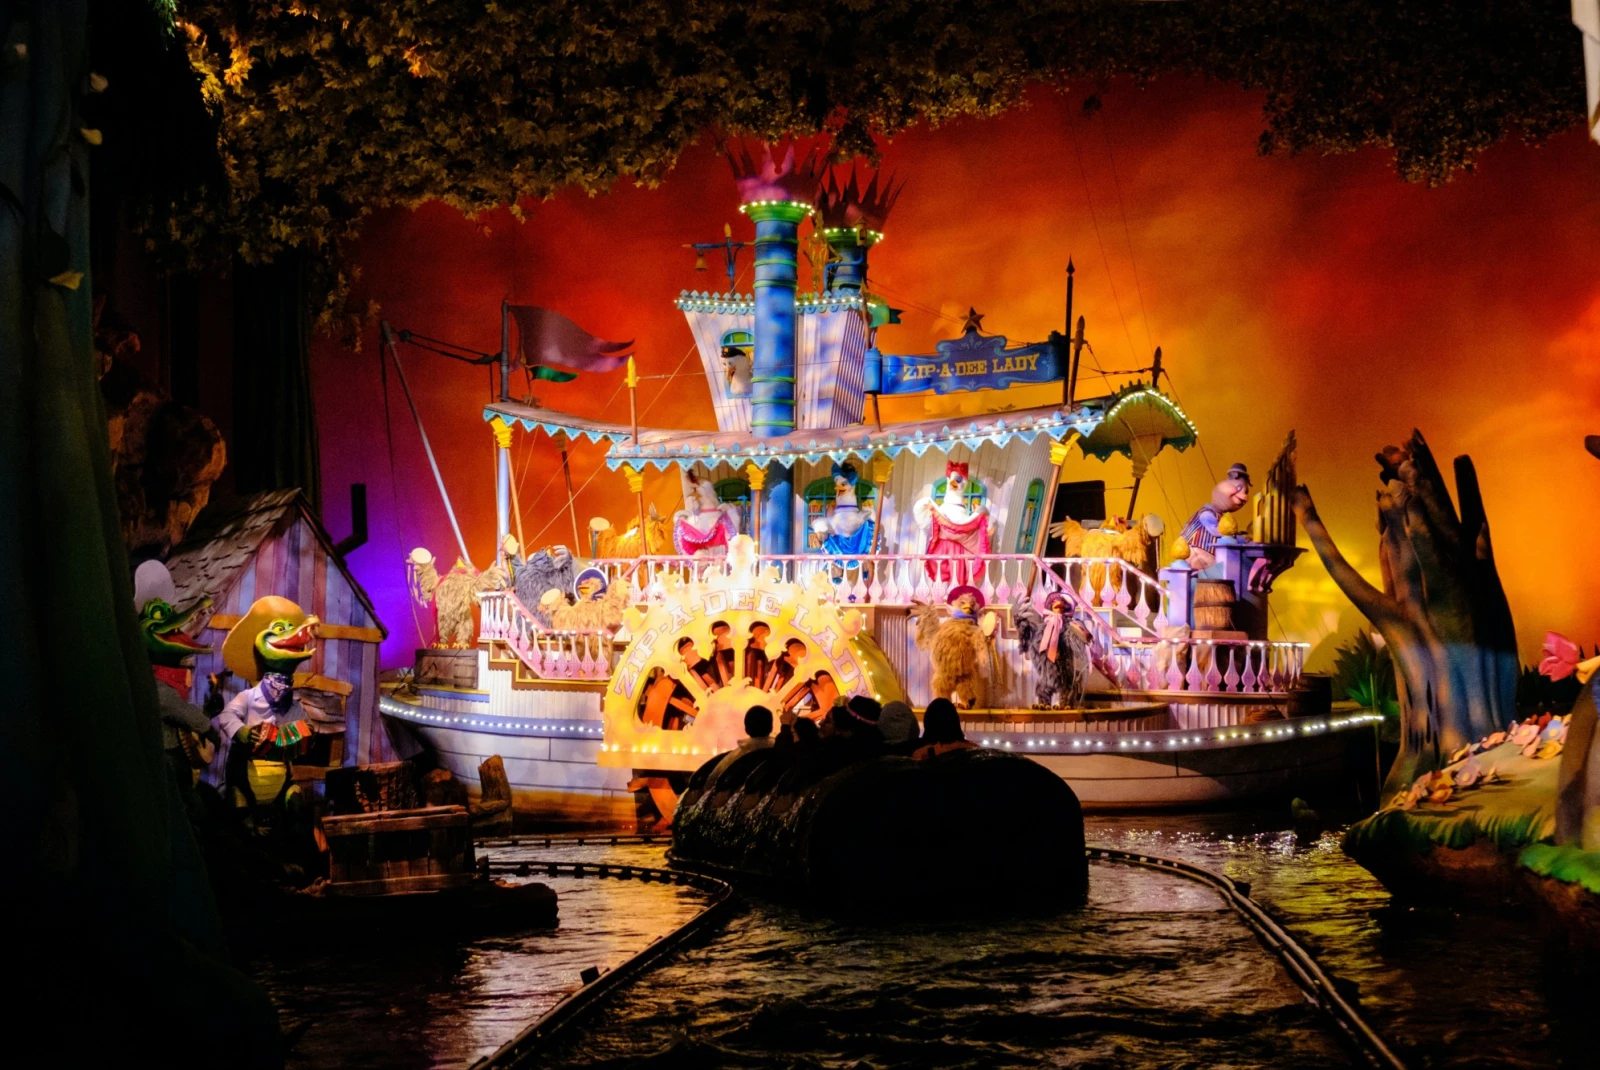 colorful stage boat inside an amusement park ride